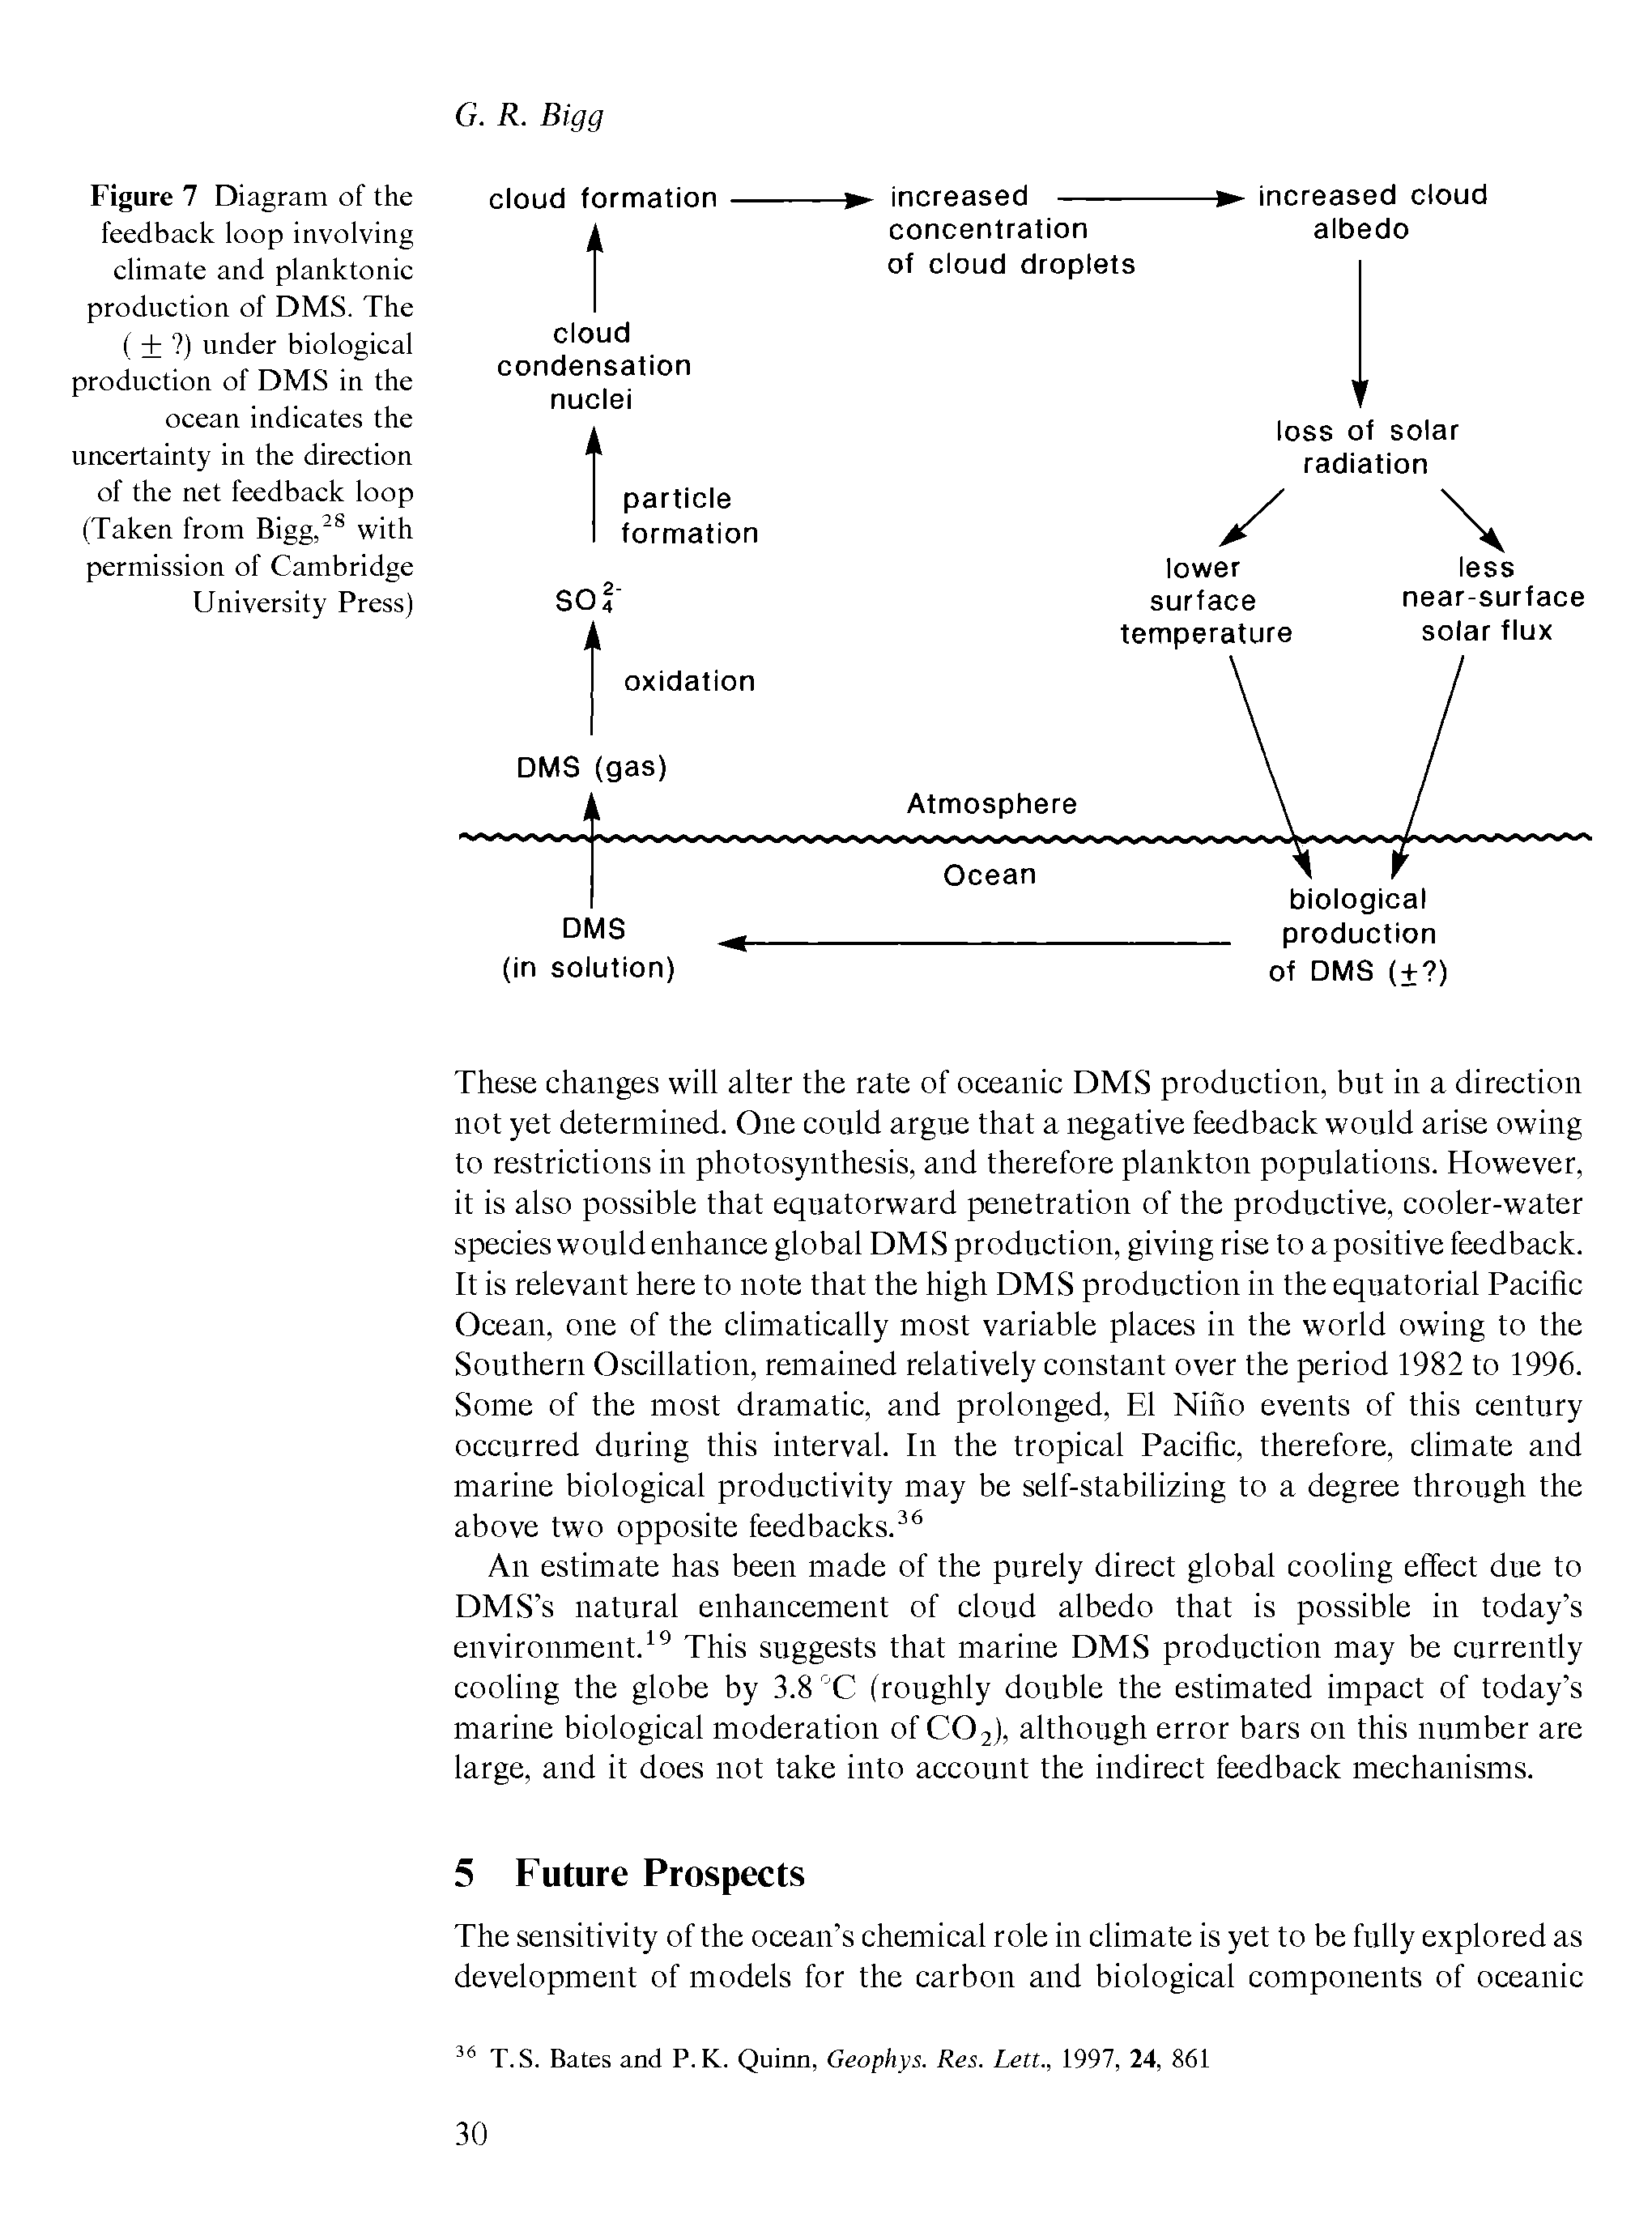 Figure 7 Diagram of the feedback loop involving climate and planktonic production of DMS. The ( + ) under biological production of DMS in the ocean indicates the uncertainty in the direction of the net feedback loop (Taken from Bigg," with permission of Cambridge University Press)...